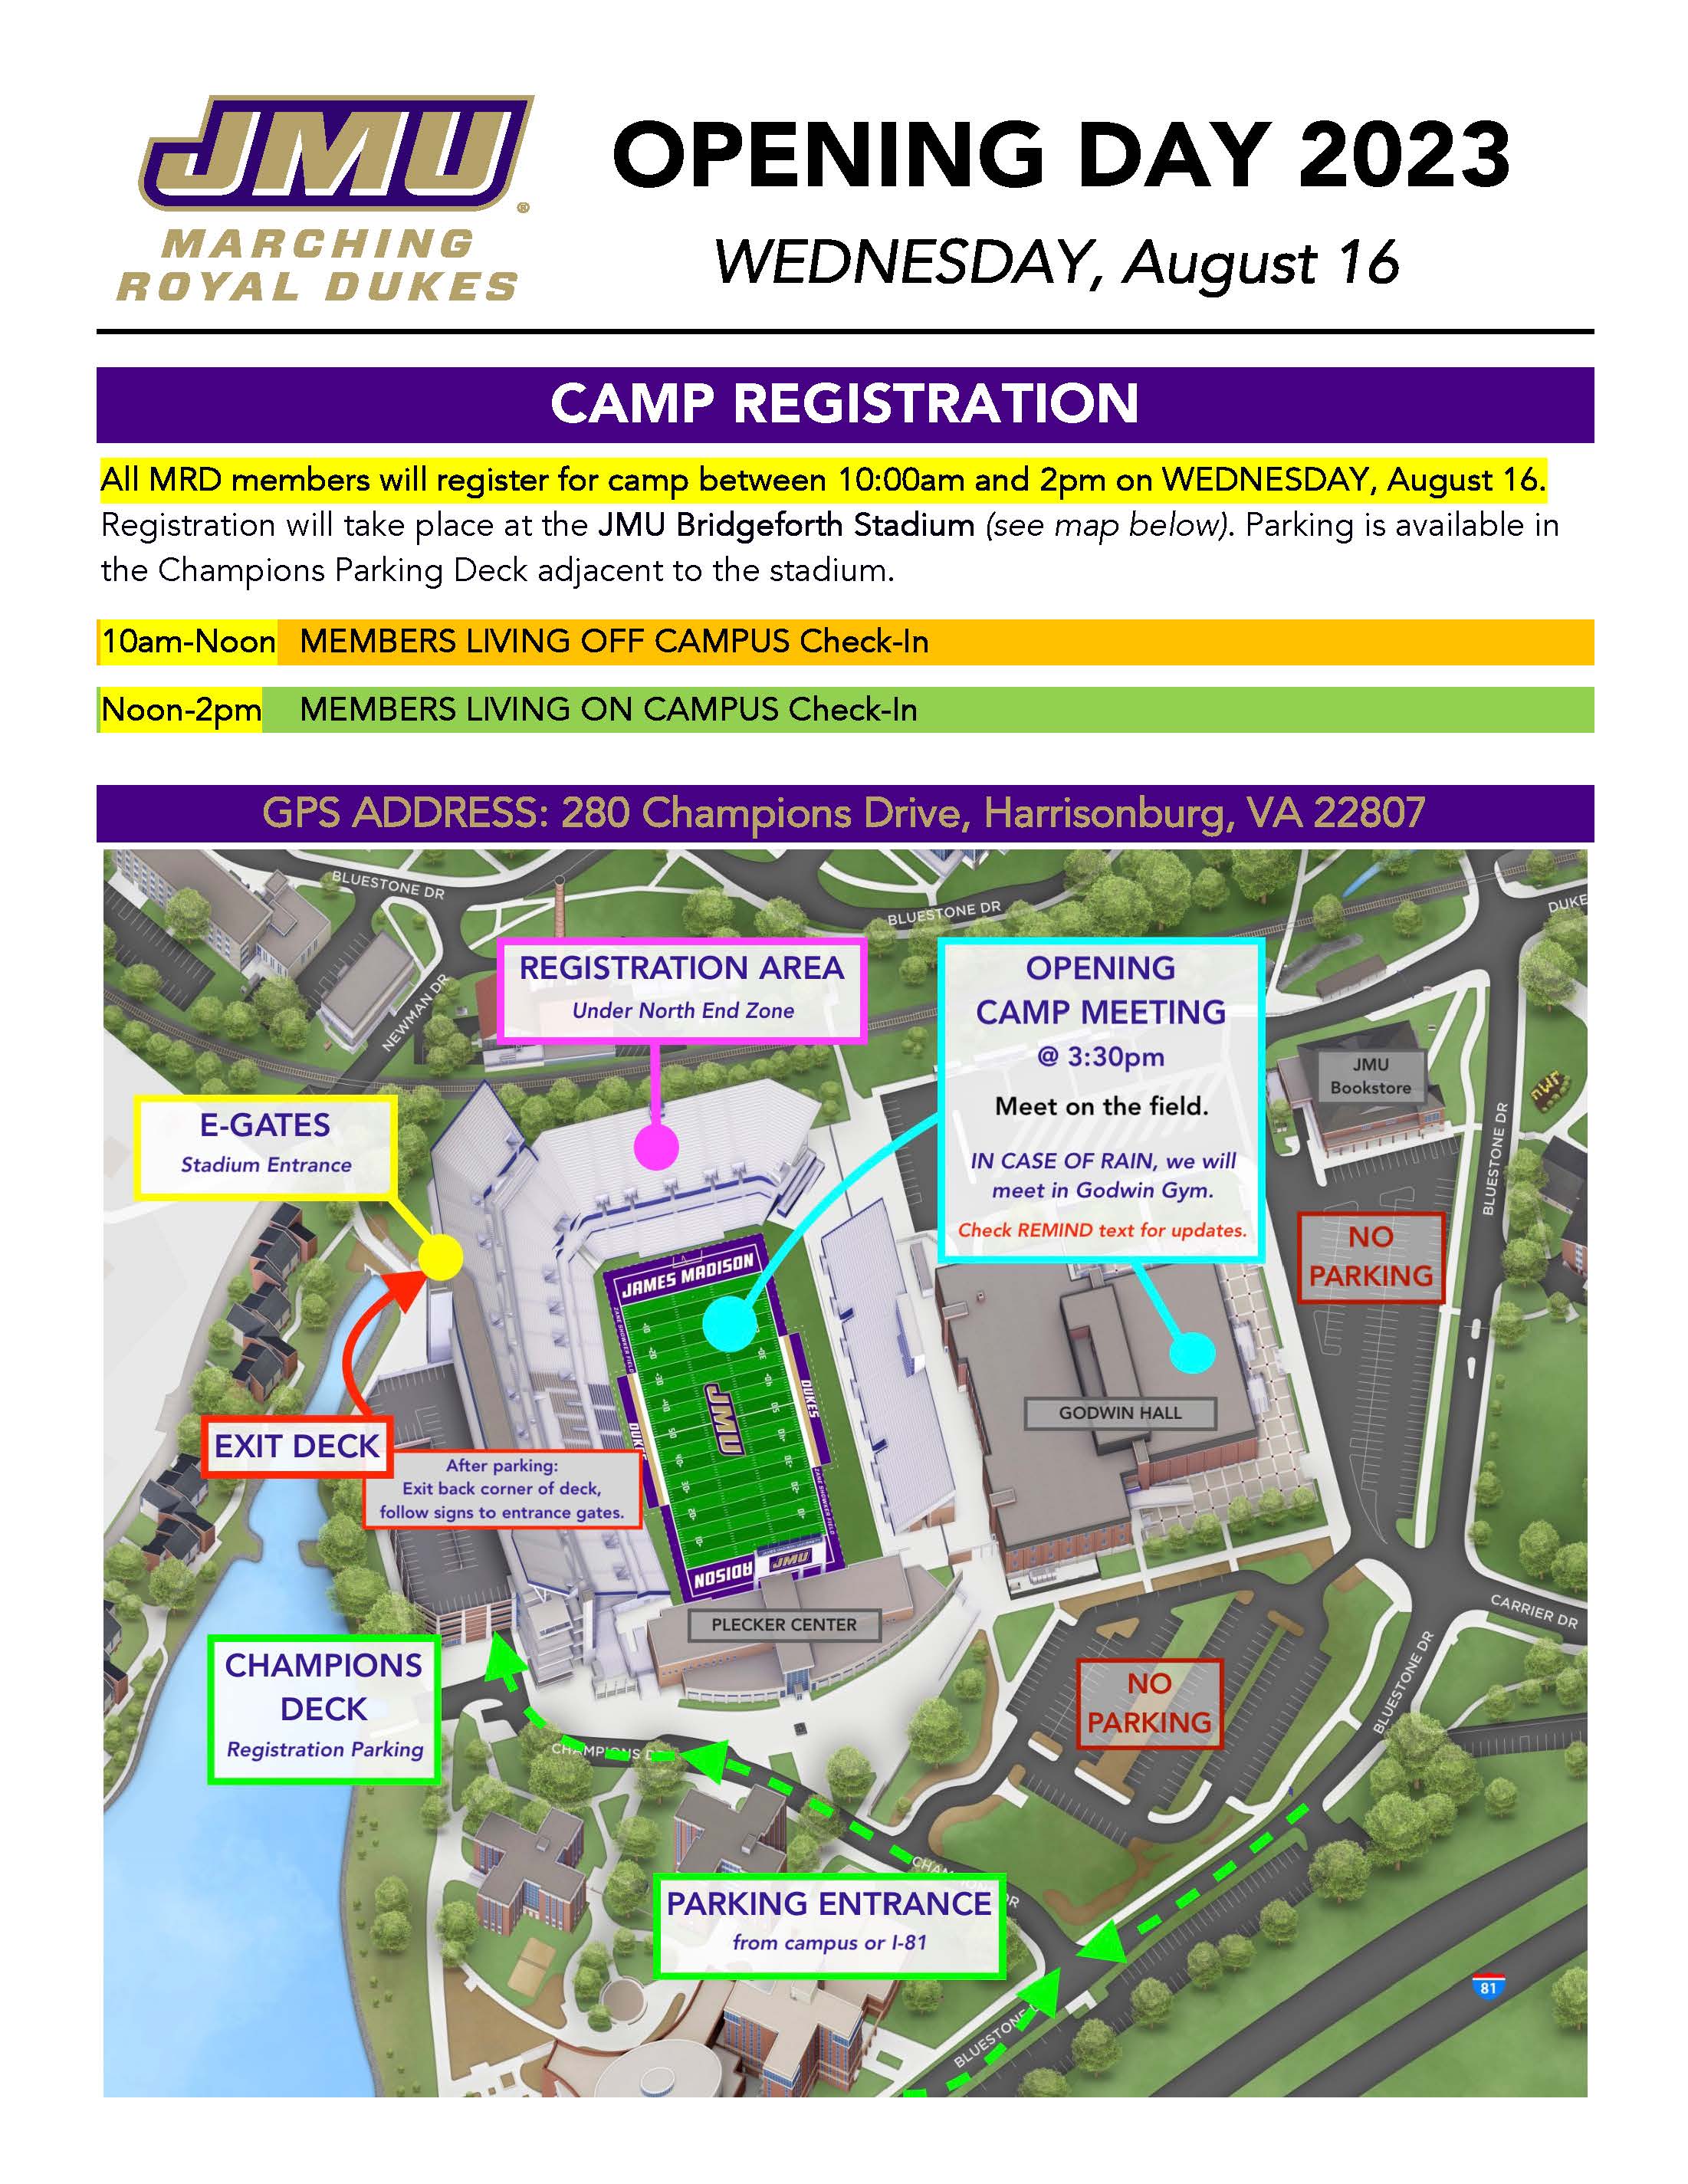 mrd_camp_-_opening_day_schedule_2023_pdf_page_1.jpg